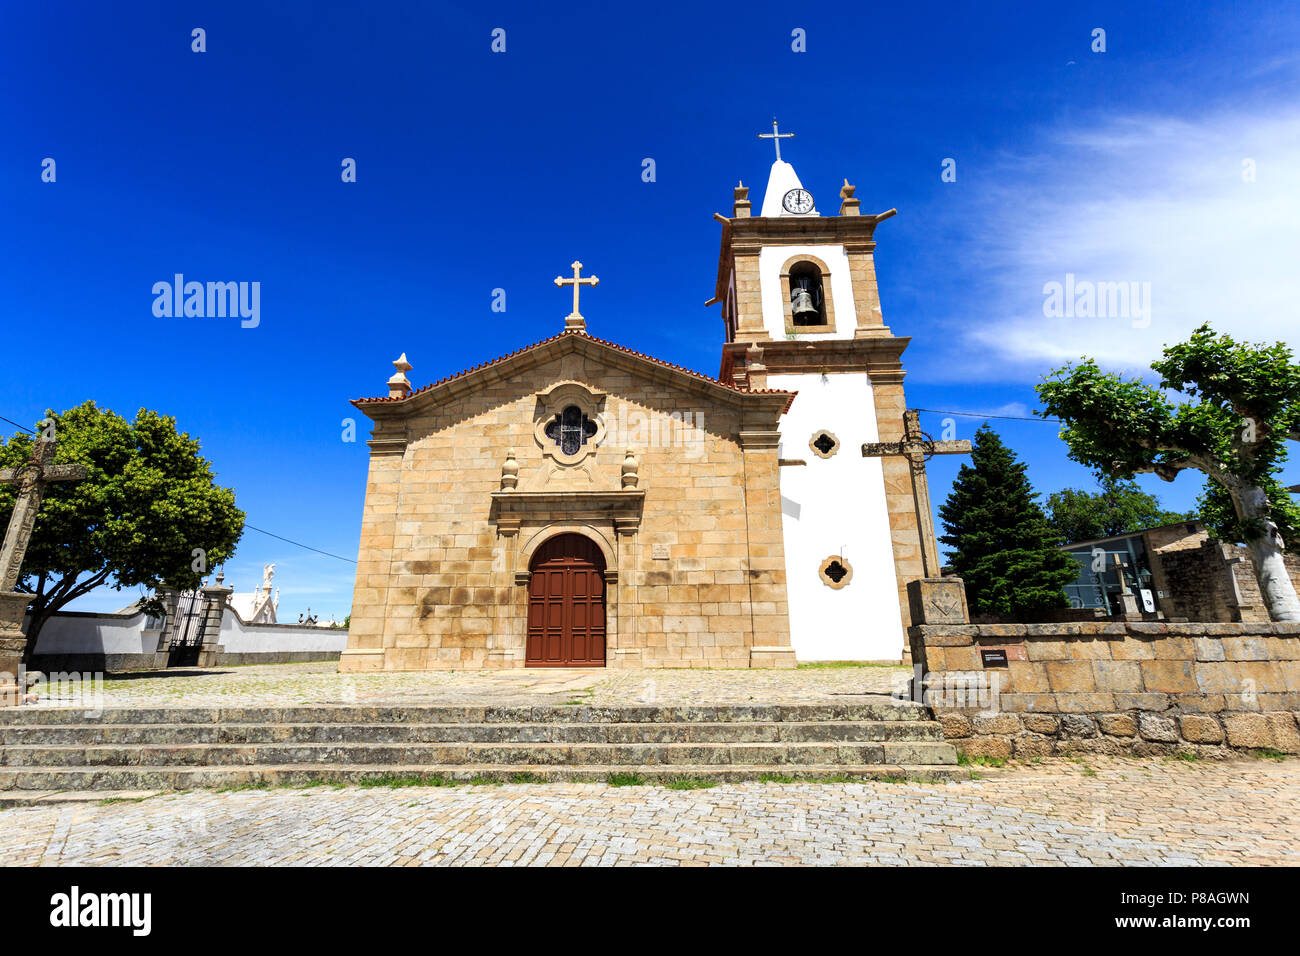 Facade of the Mannerist parish church built in the 16th century in the village of Caria, Castelo Branco, Portugal Stock Photo